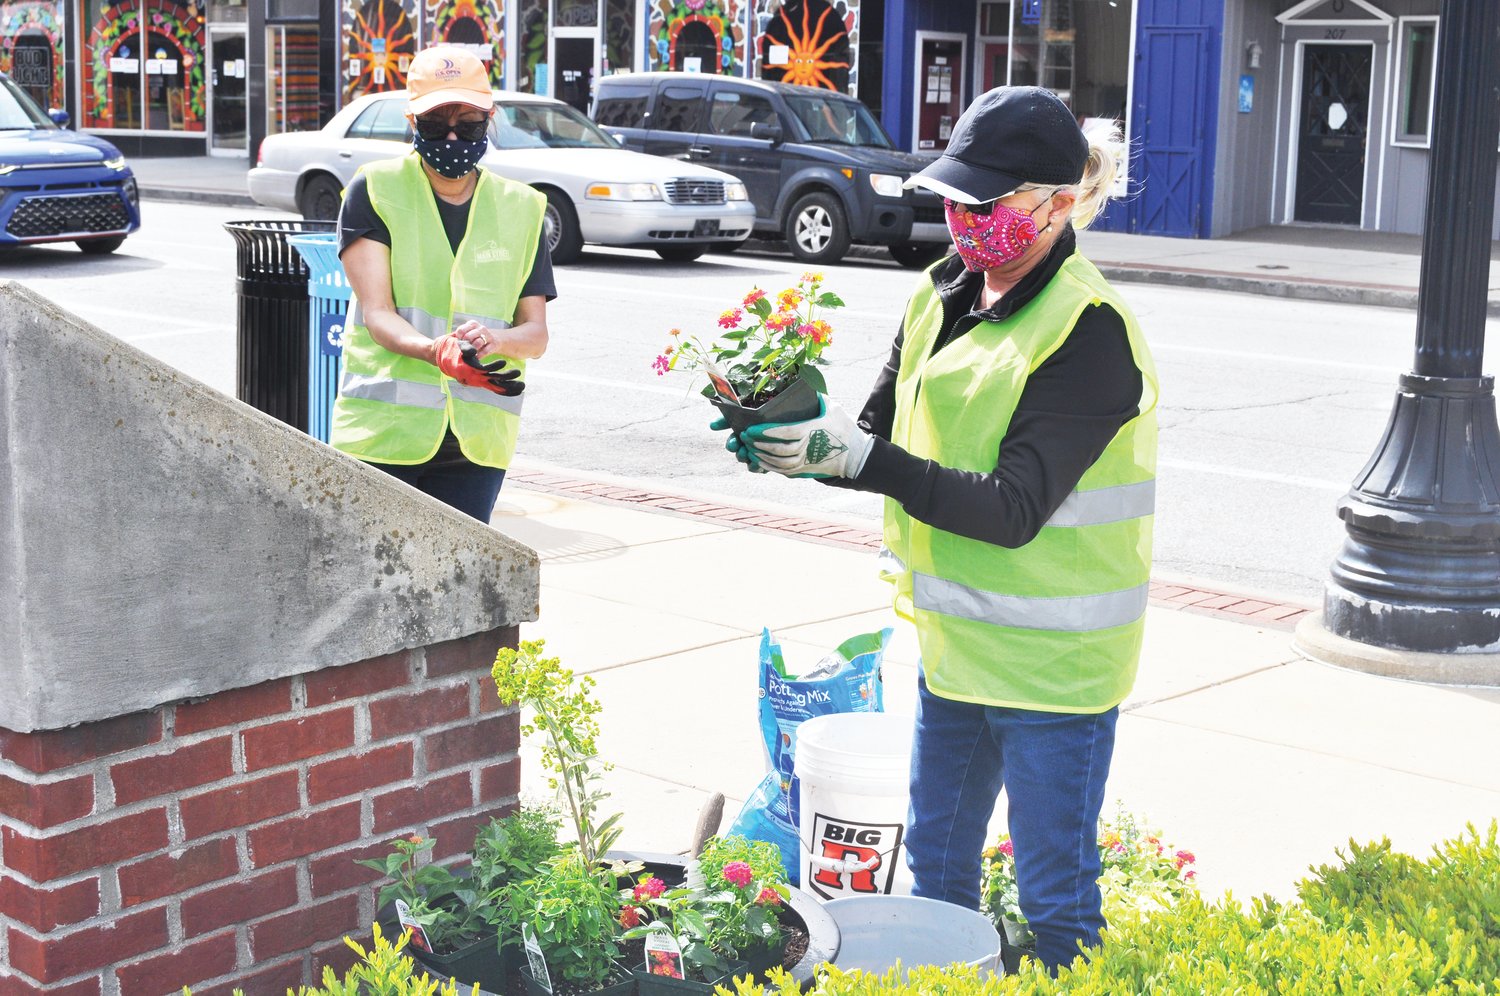 Belinda Kiger, right, inspects a flower before placing it in a planter as Marie Stocks puts on her gloves Monday at Marie Canine Plaza. Crawfordsville Main Street members planted flowers in the plaza after delivering hanging baskets for Crawfordsville Electric Light & Power employees to hang in the downtown area. The flowers were procured from Davidson Greenhouse & Nursery.